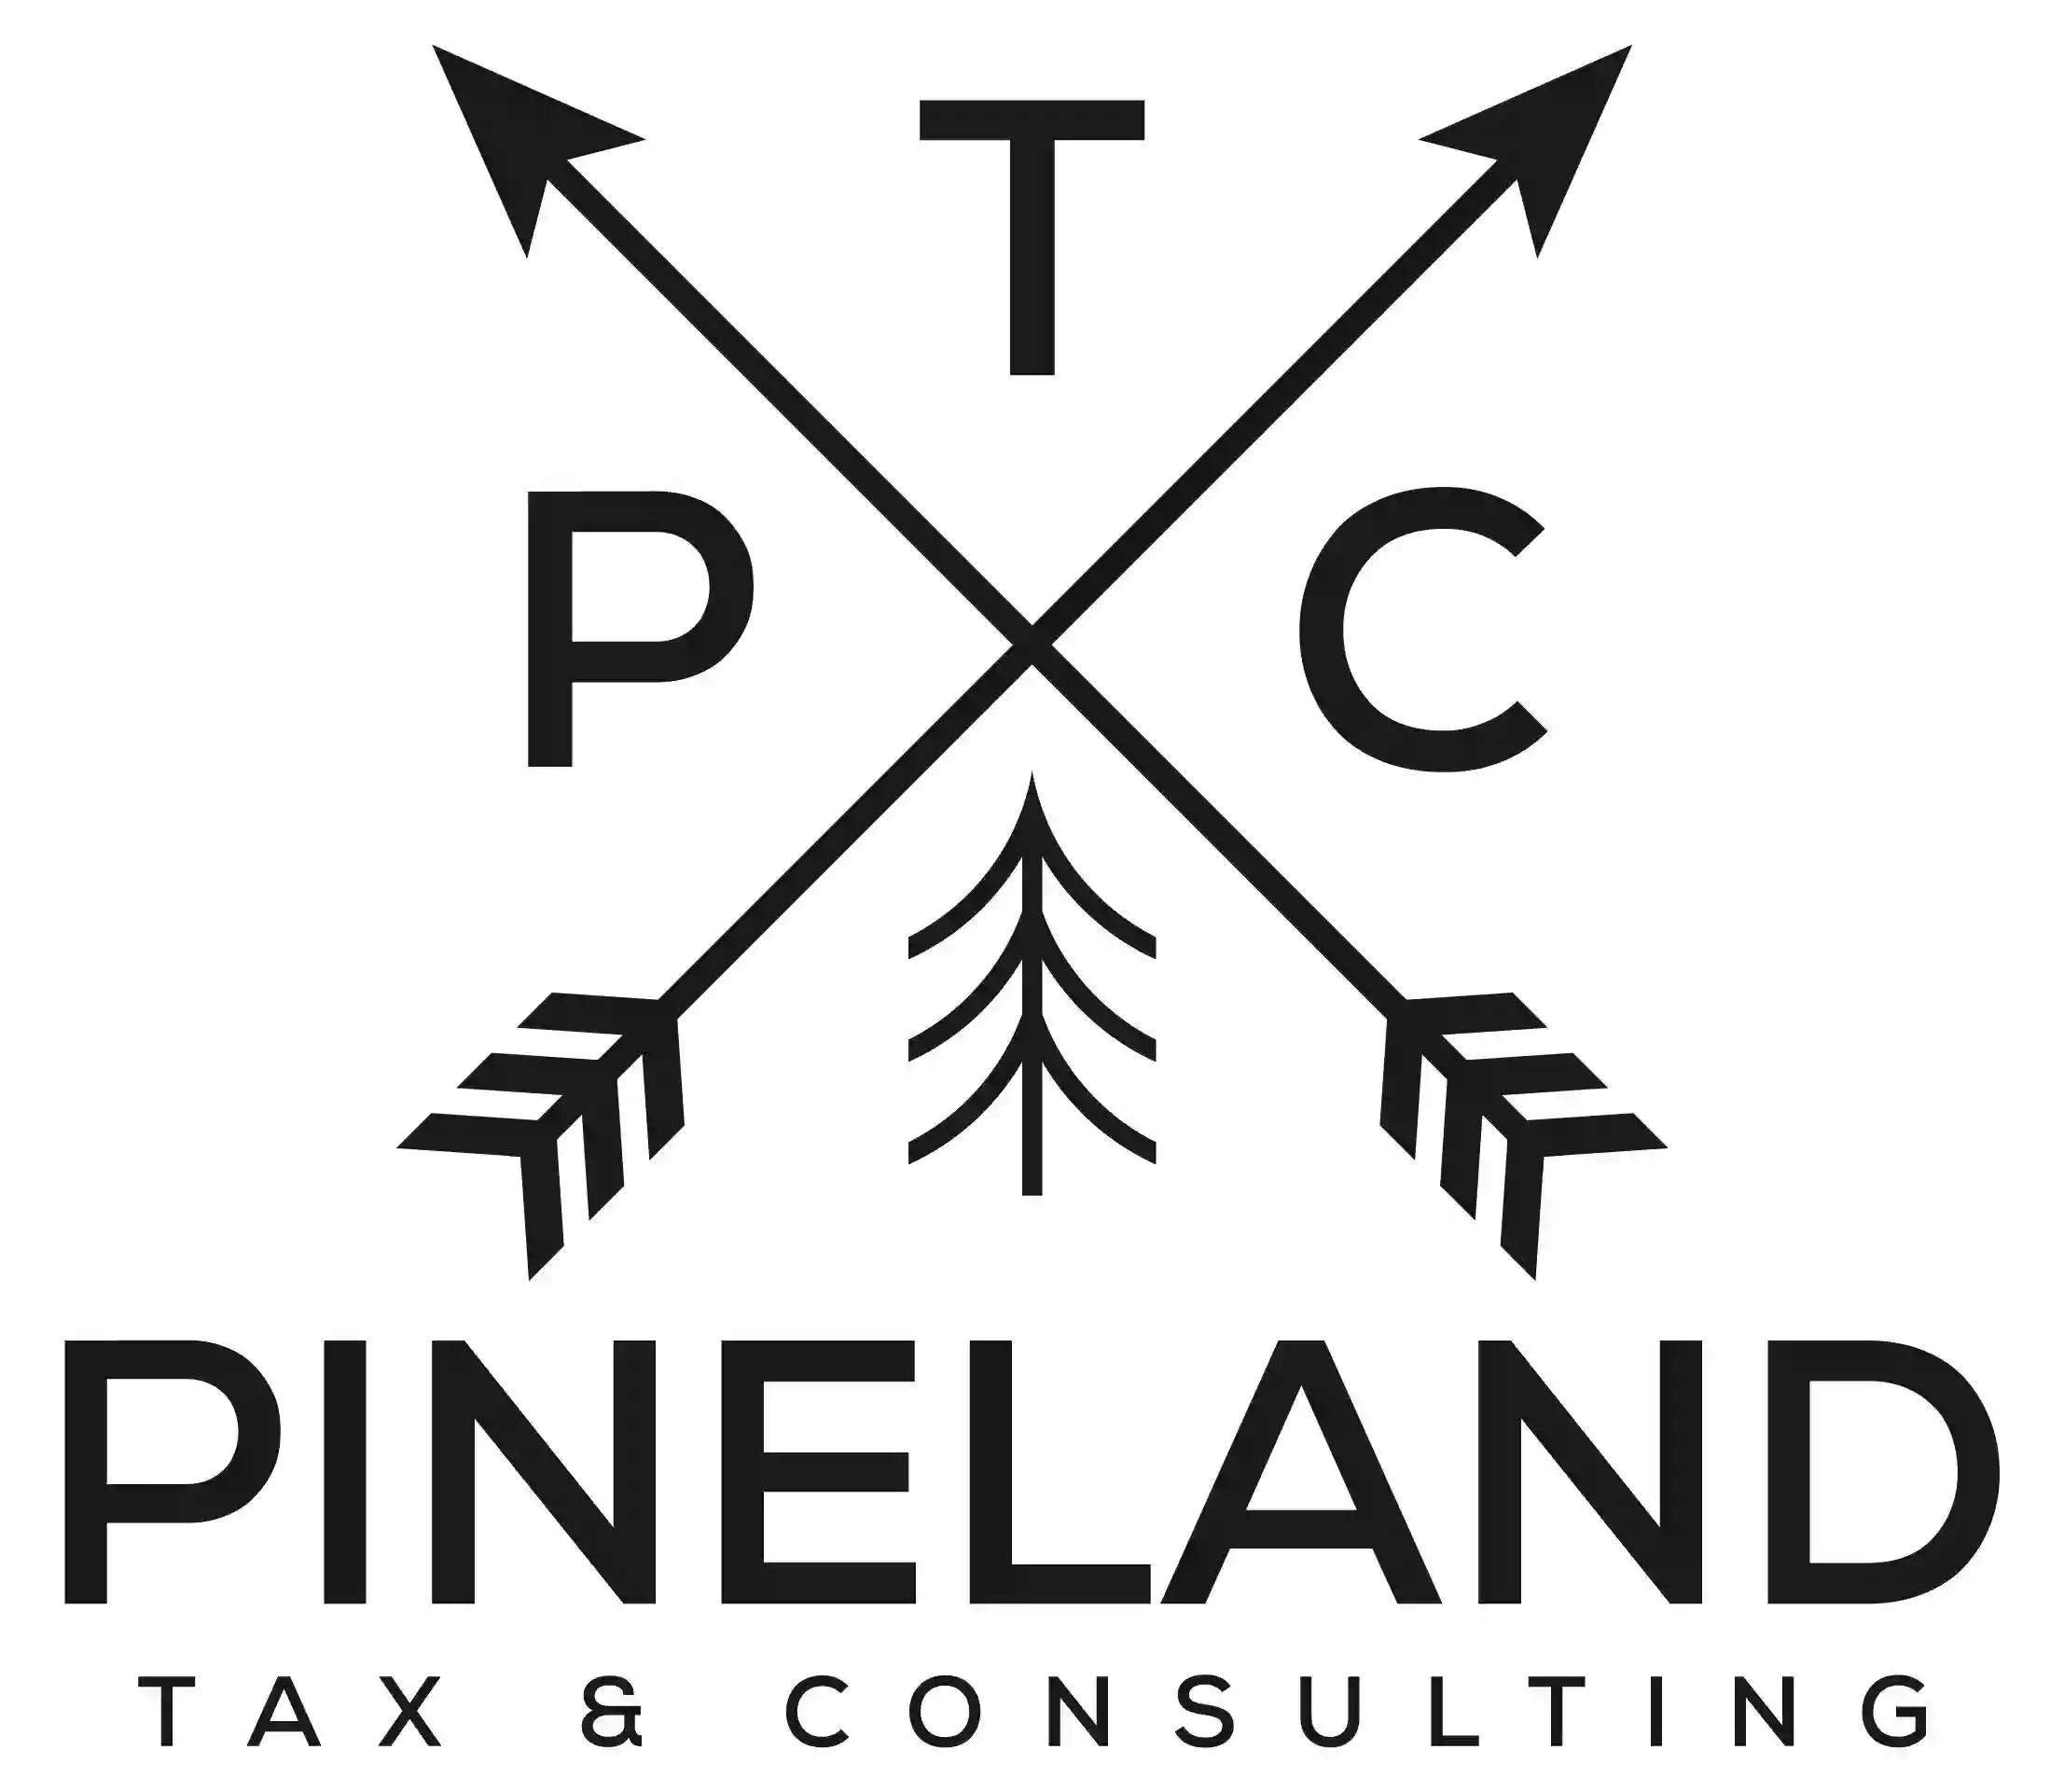 Pineland Tax & consulting